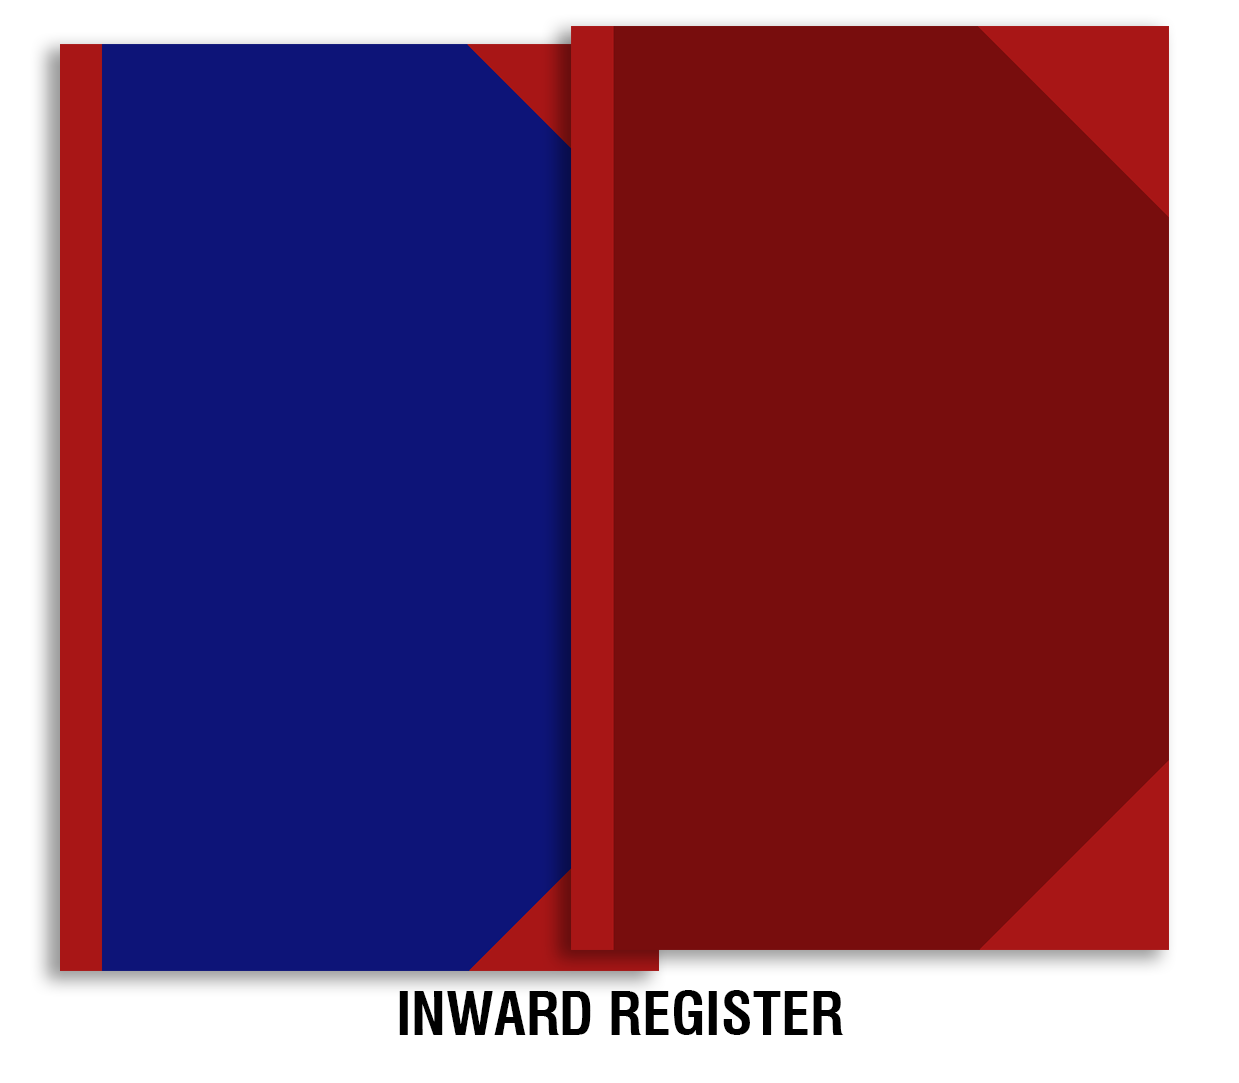 Inward, Outward, Visitor and Gate Registers